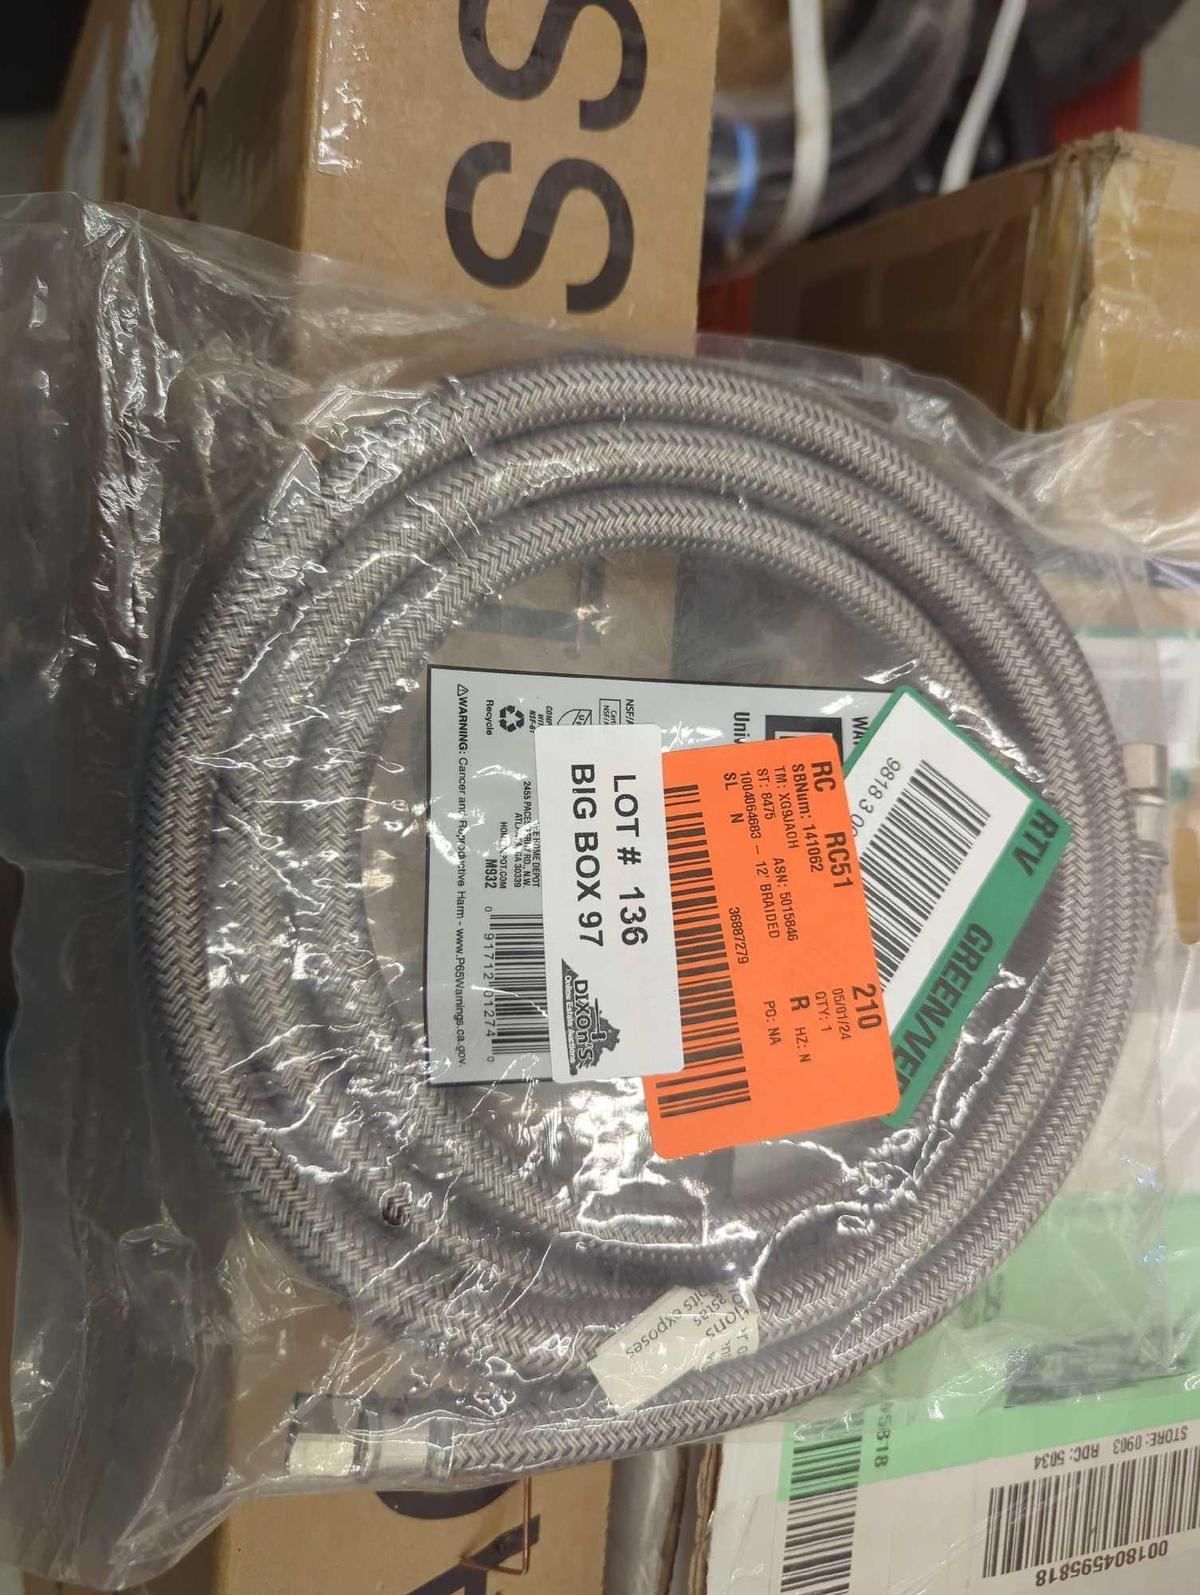 Everbilt 12 ft. Braided Ice Maker Supply Line, Retail Price $18, Appears to be New in Factory Sealed